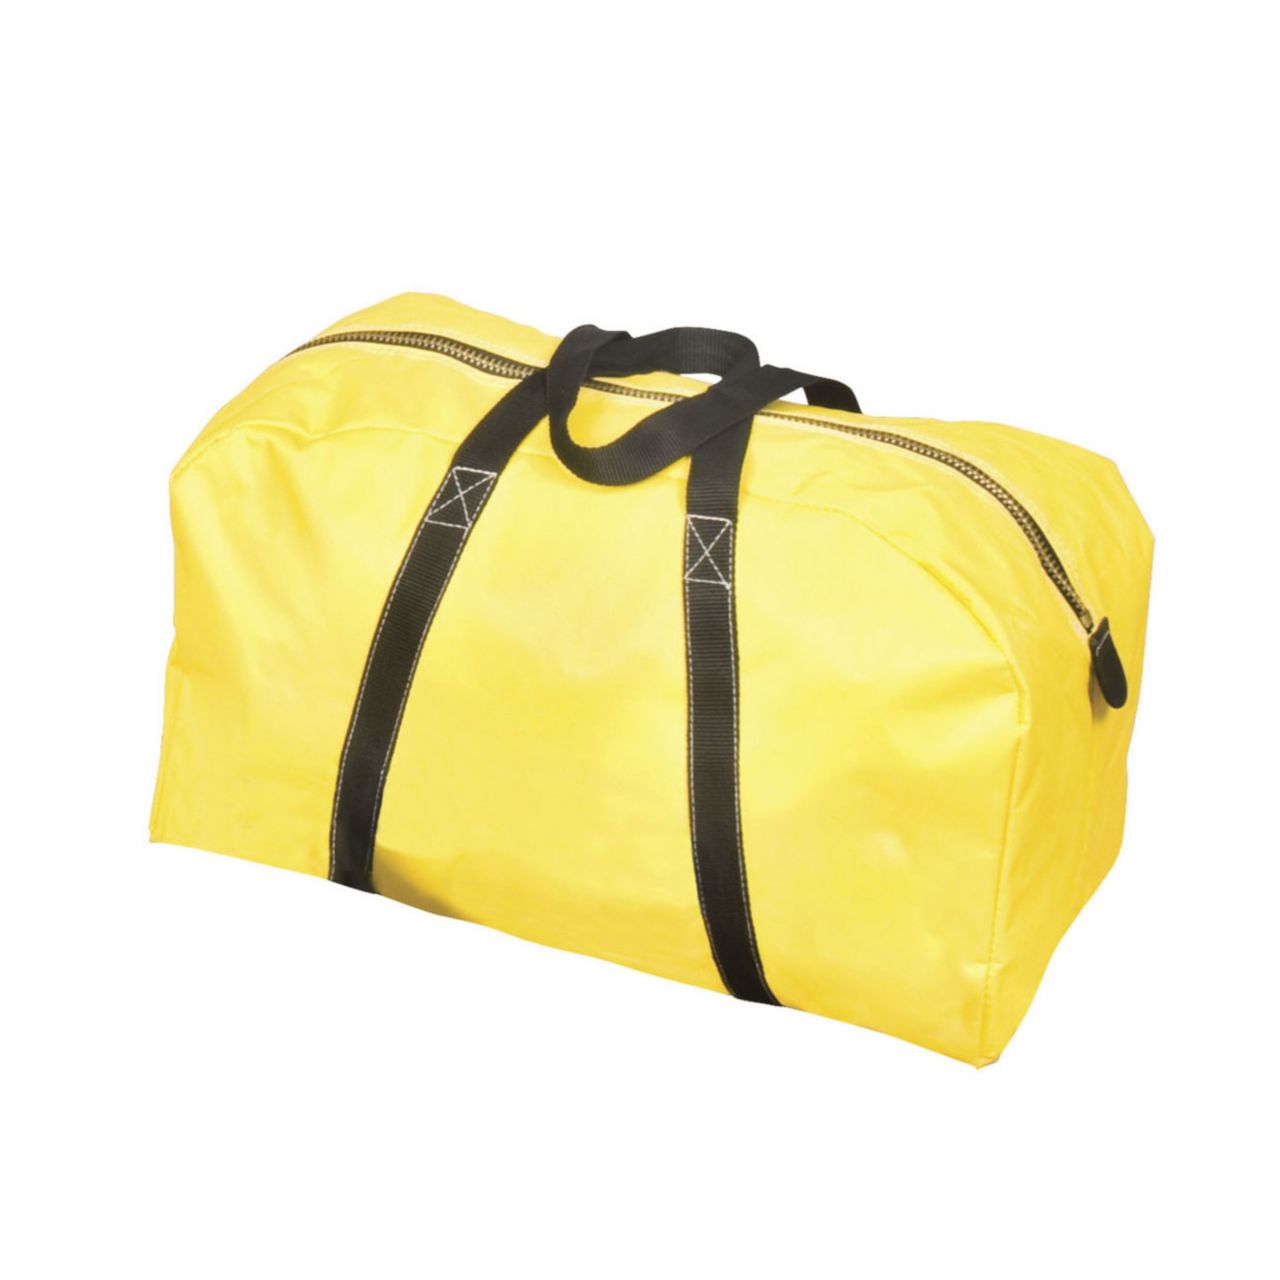 Miller Fall Protection Equipment Bag - Accessories